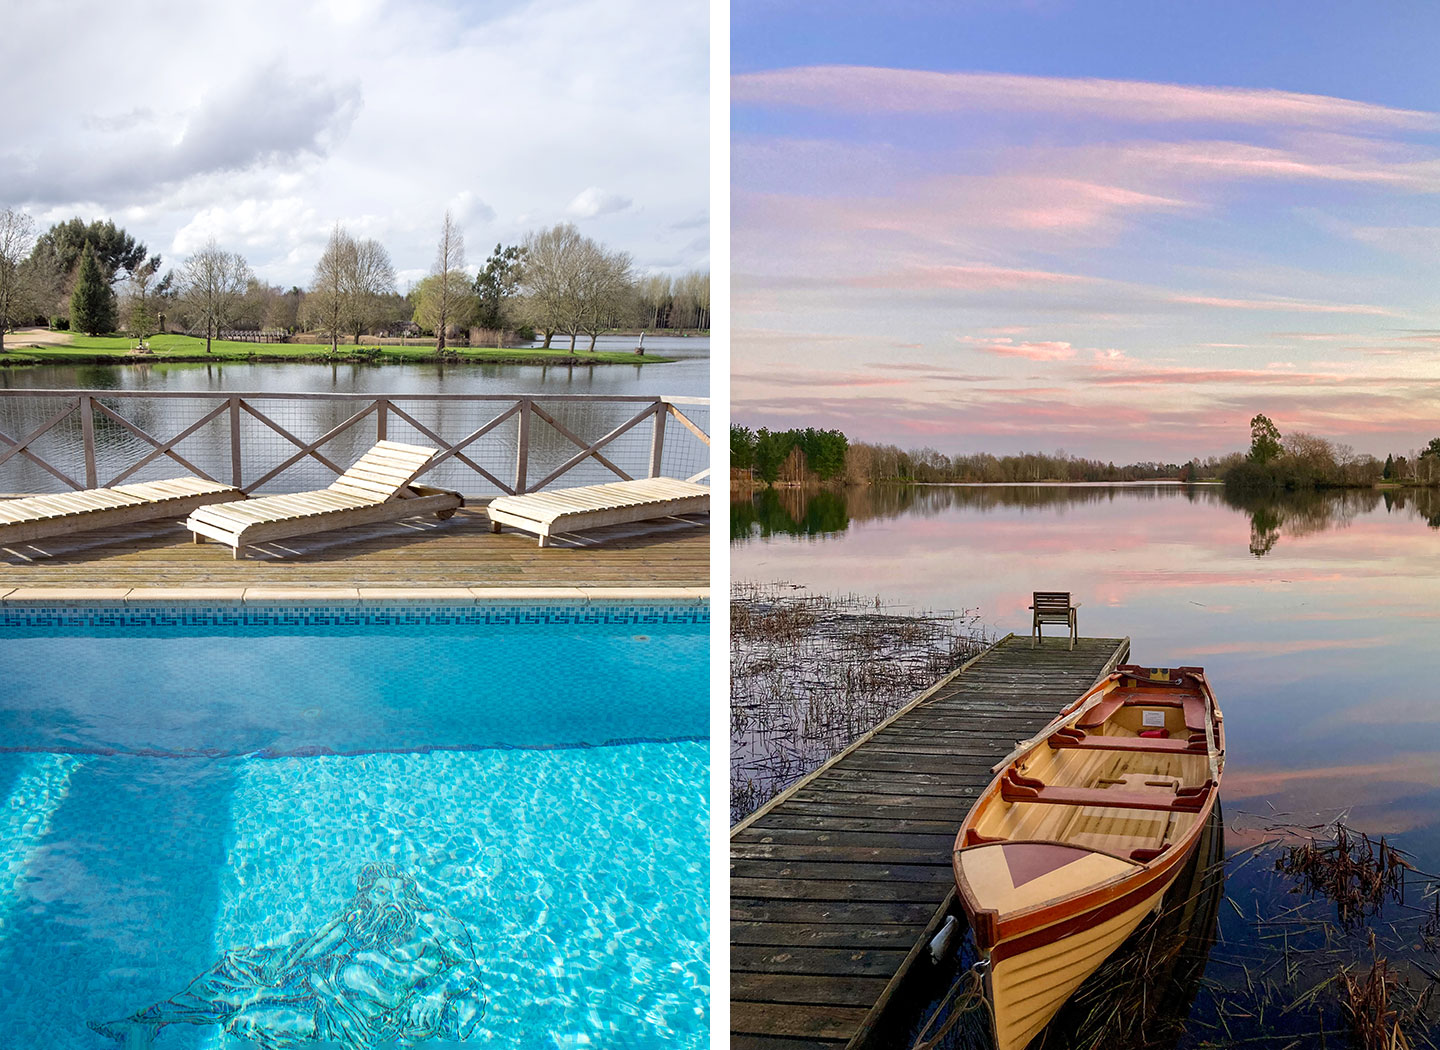 Mayo Landing's pool and the cabins' rowing boats